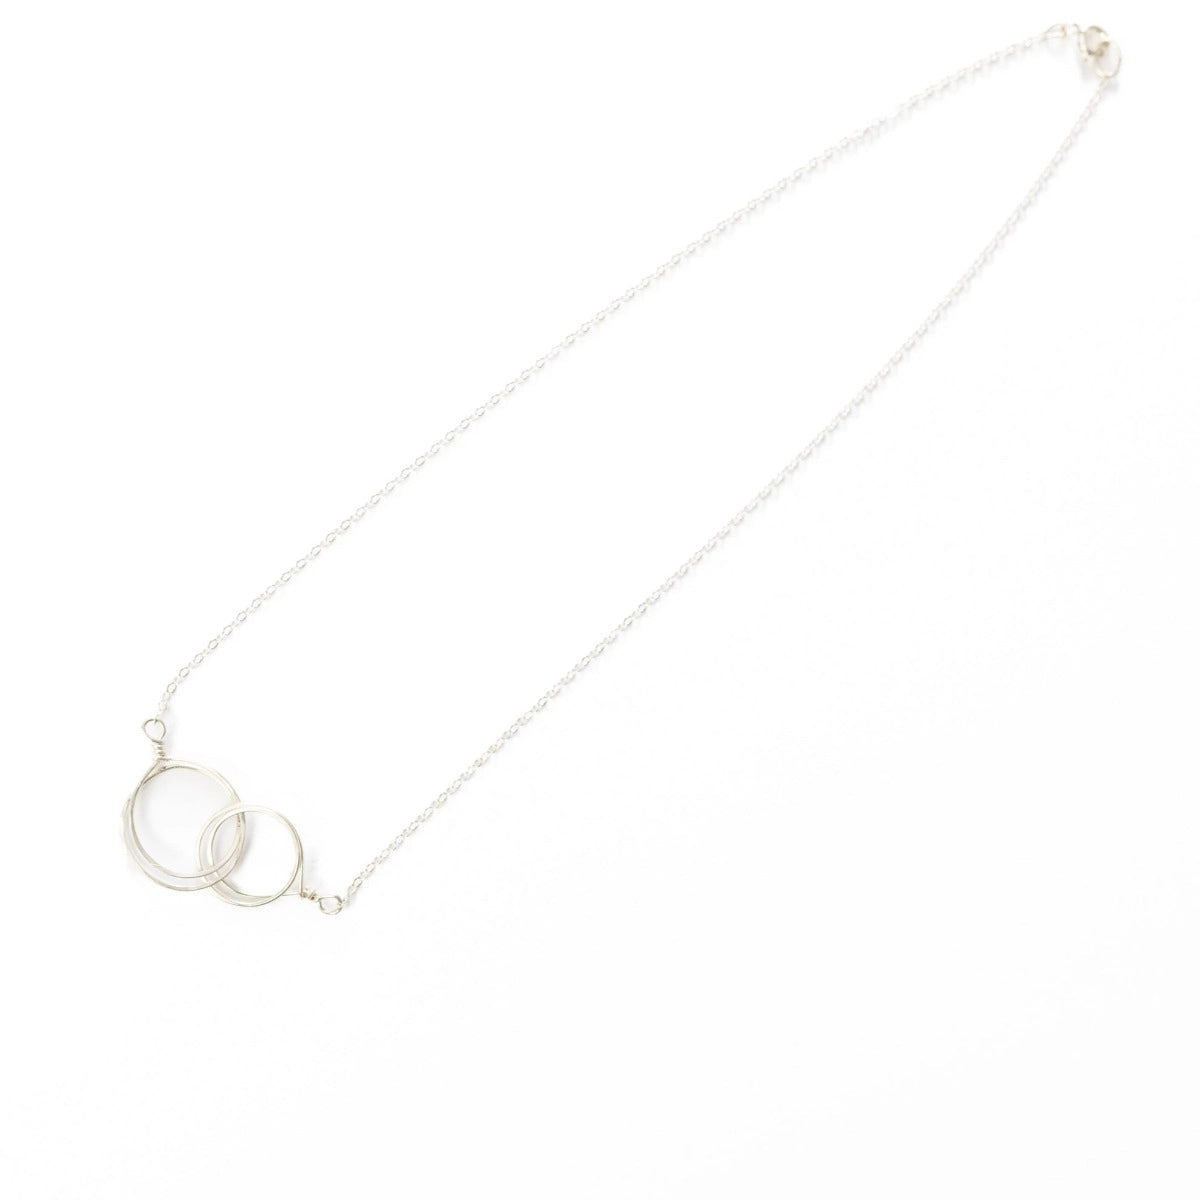 Zomi Circles Sterling Silver Necklace